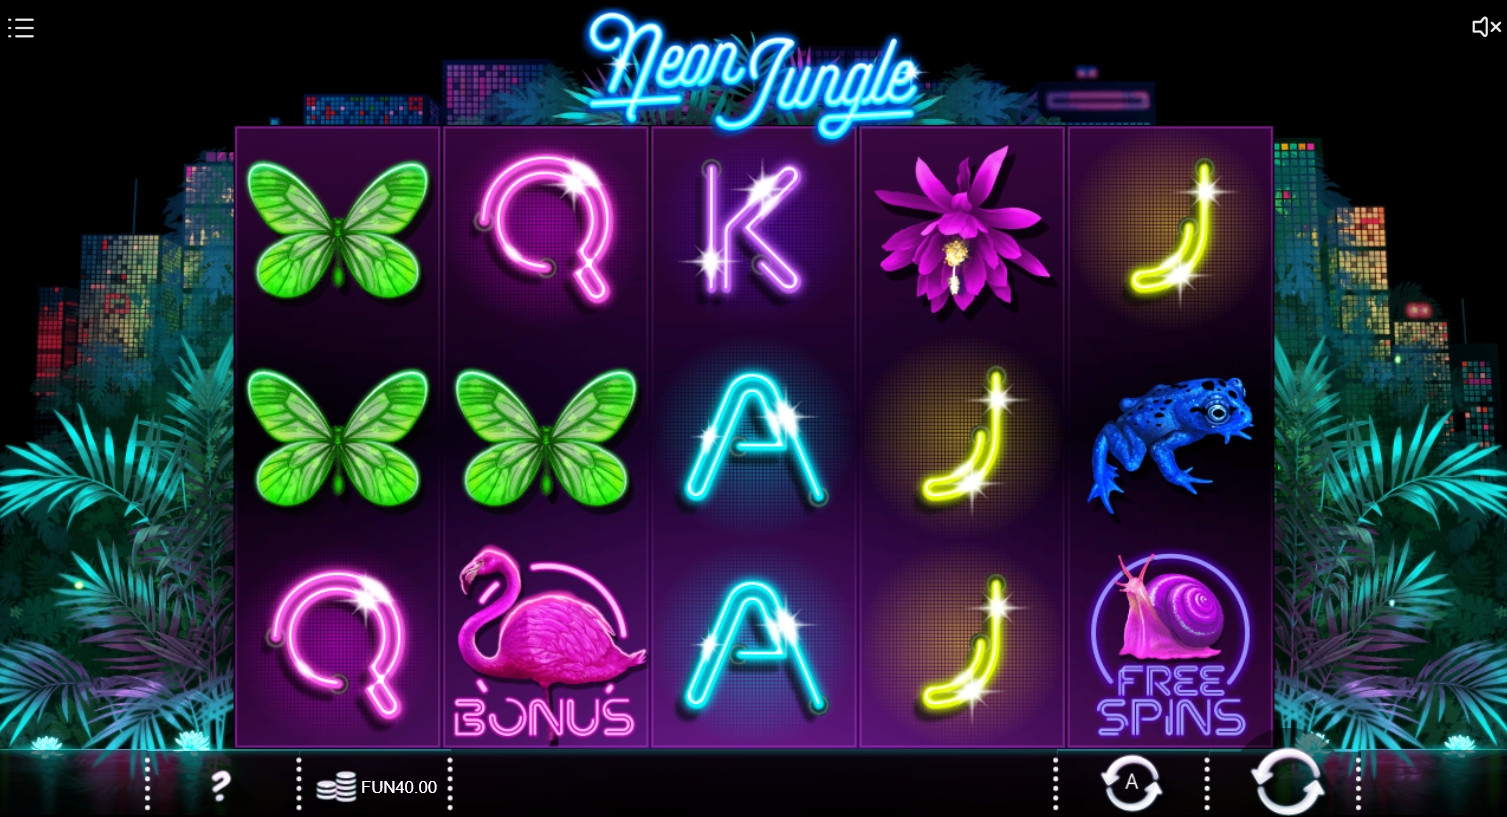 Neon Jungle (Neon Jungle) from category Slots